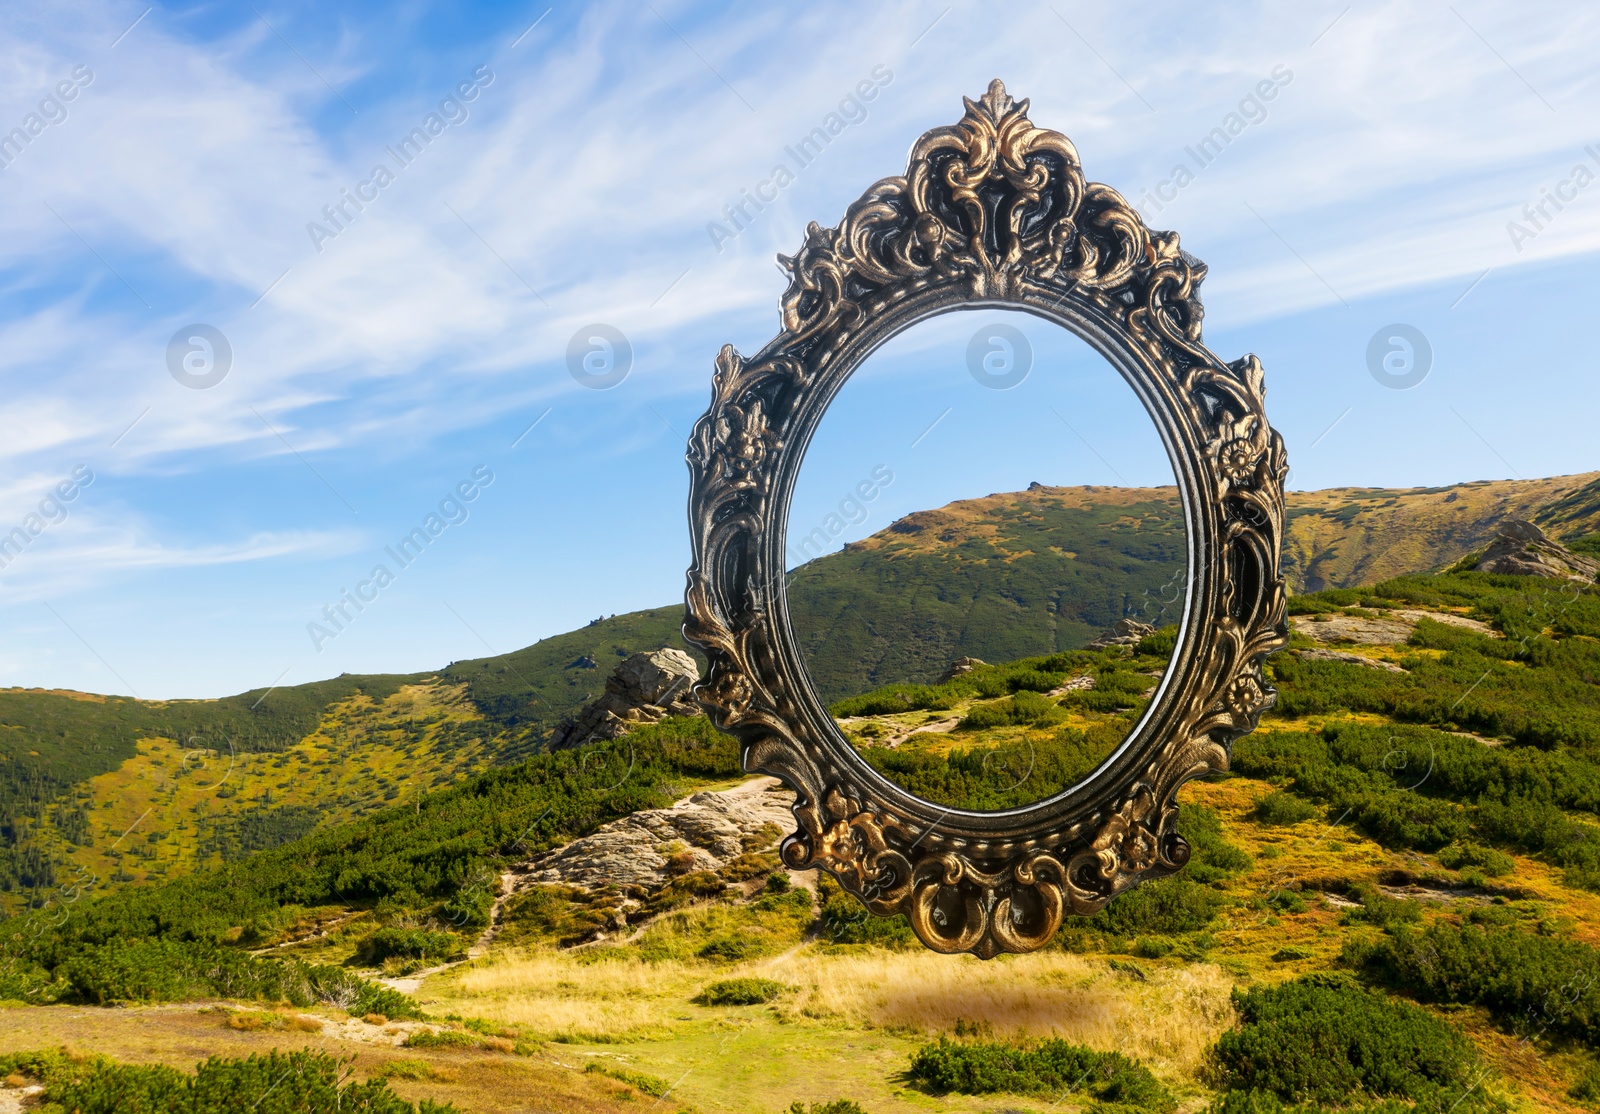 Image of Vintage frame and beautiful mountains under blue sky with clouds